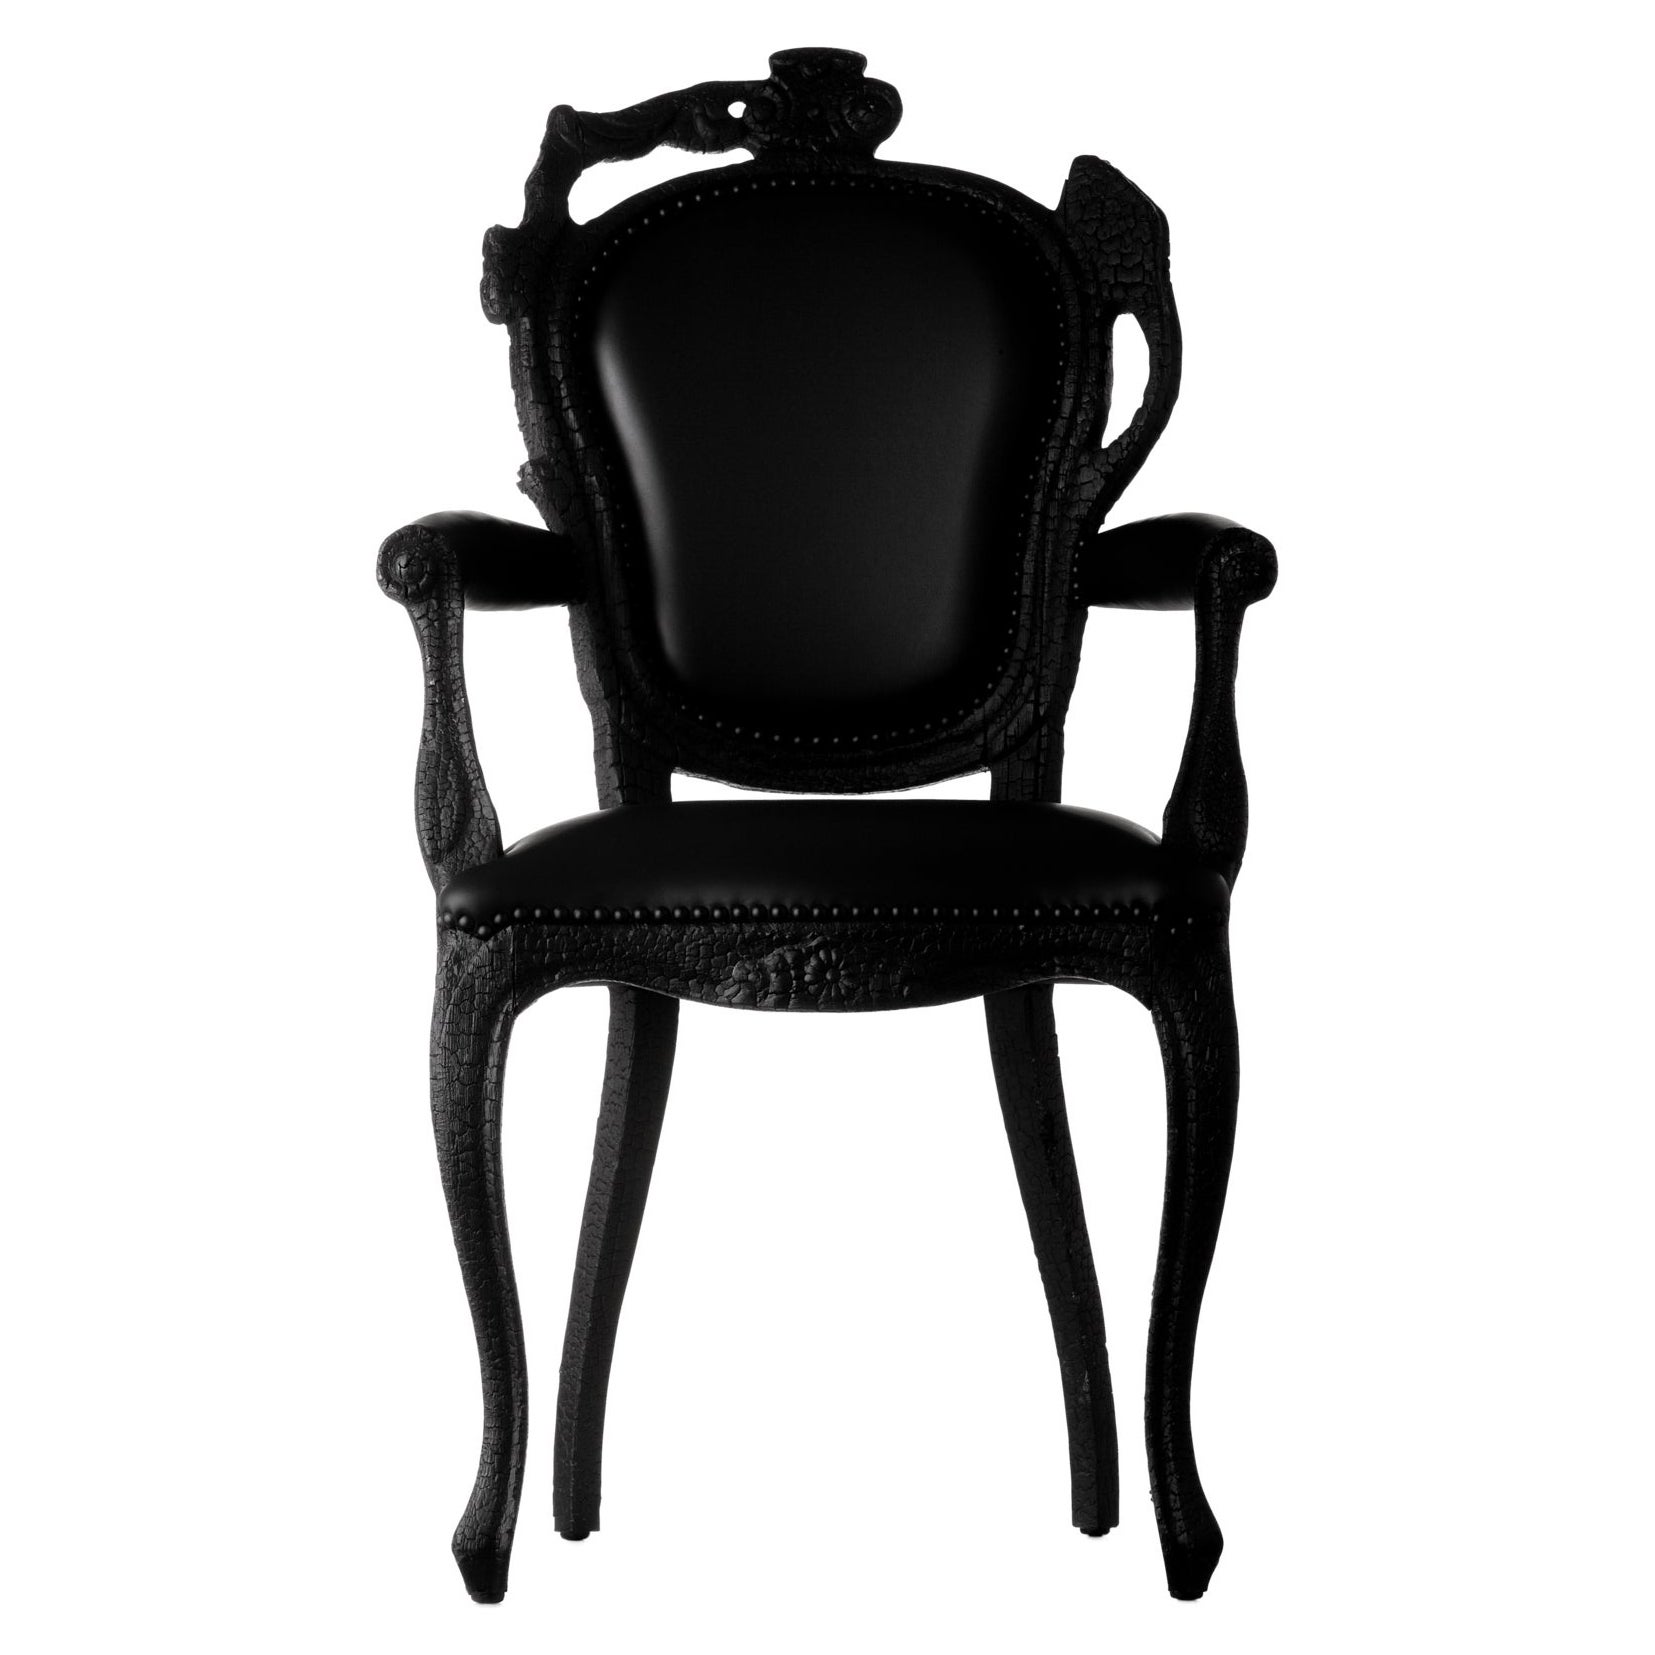 Moooi Smoke Dining Armchair in Abbracci, Black Upholstery with Burnt Wood Frame